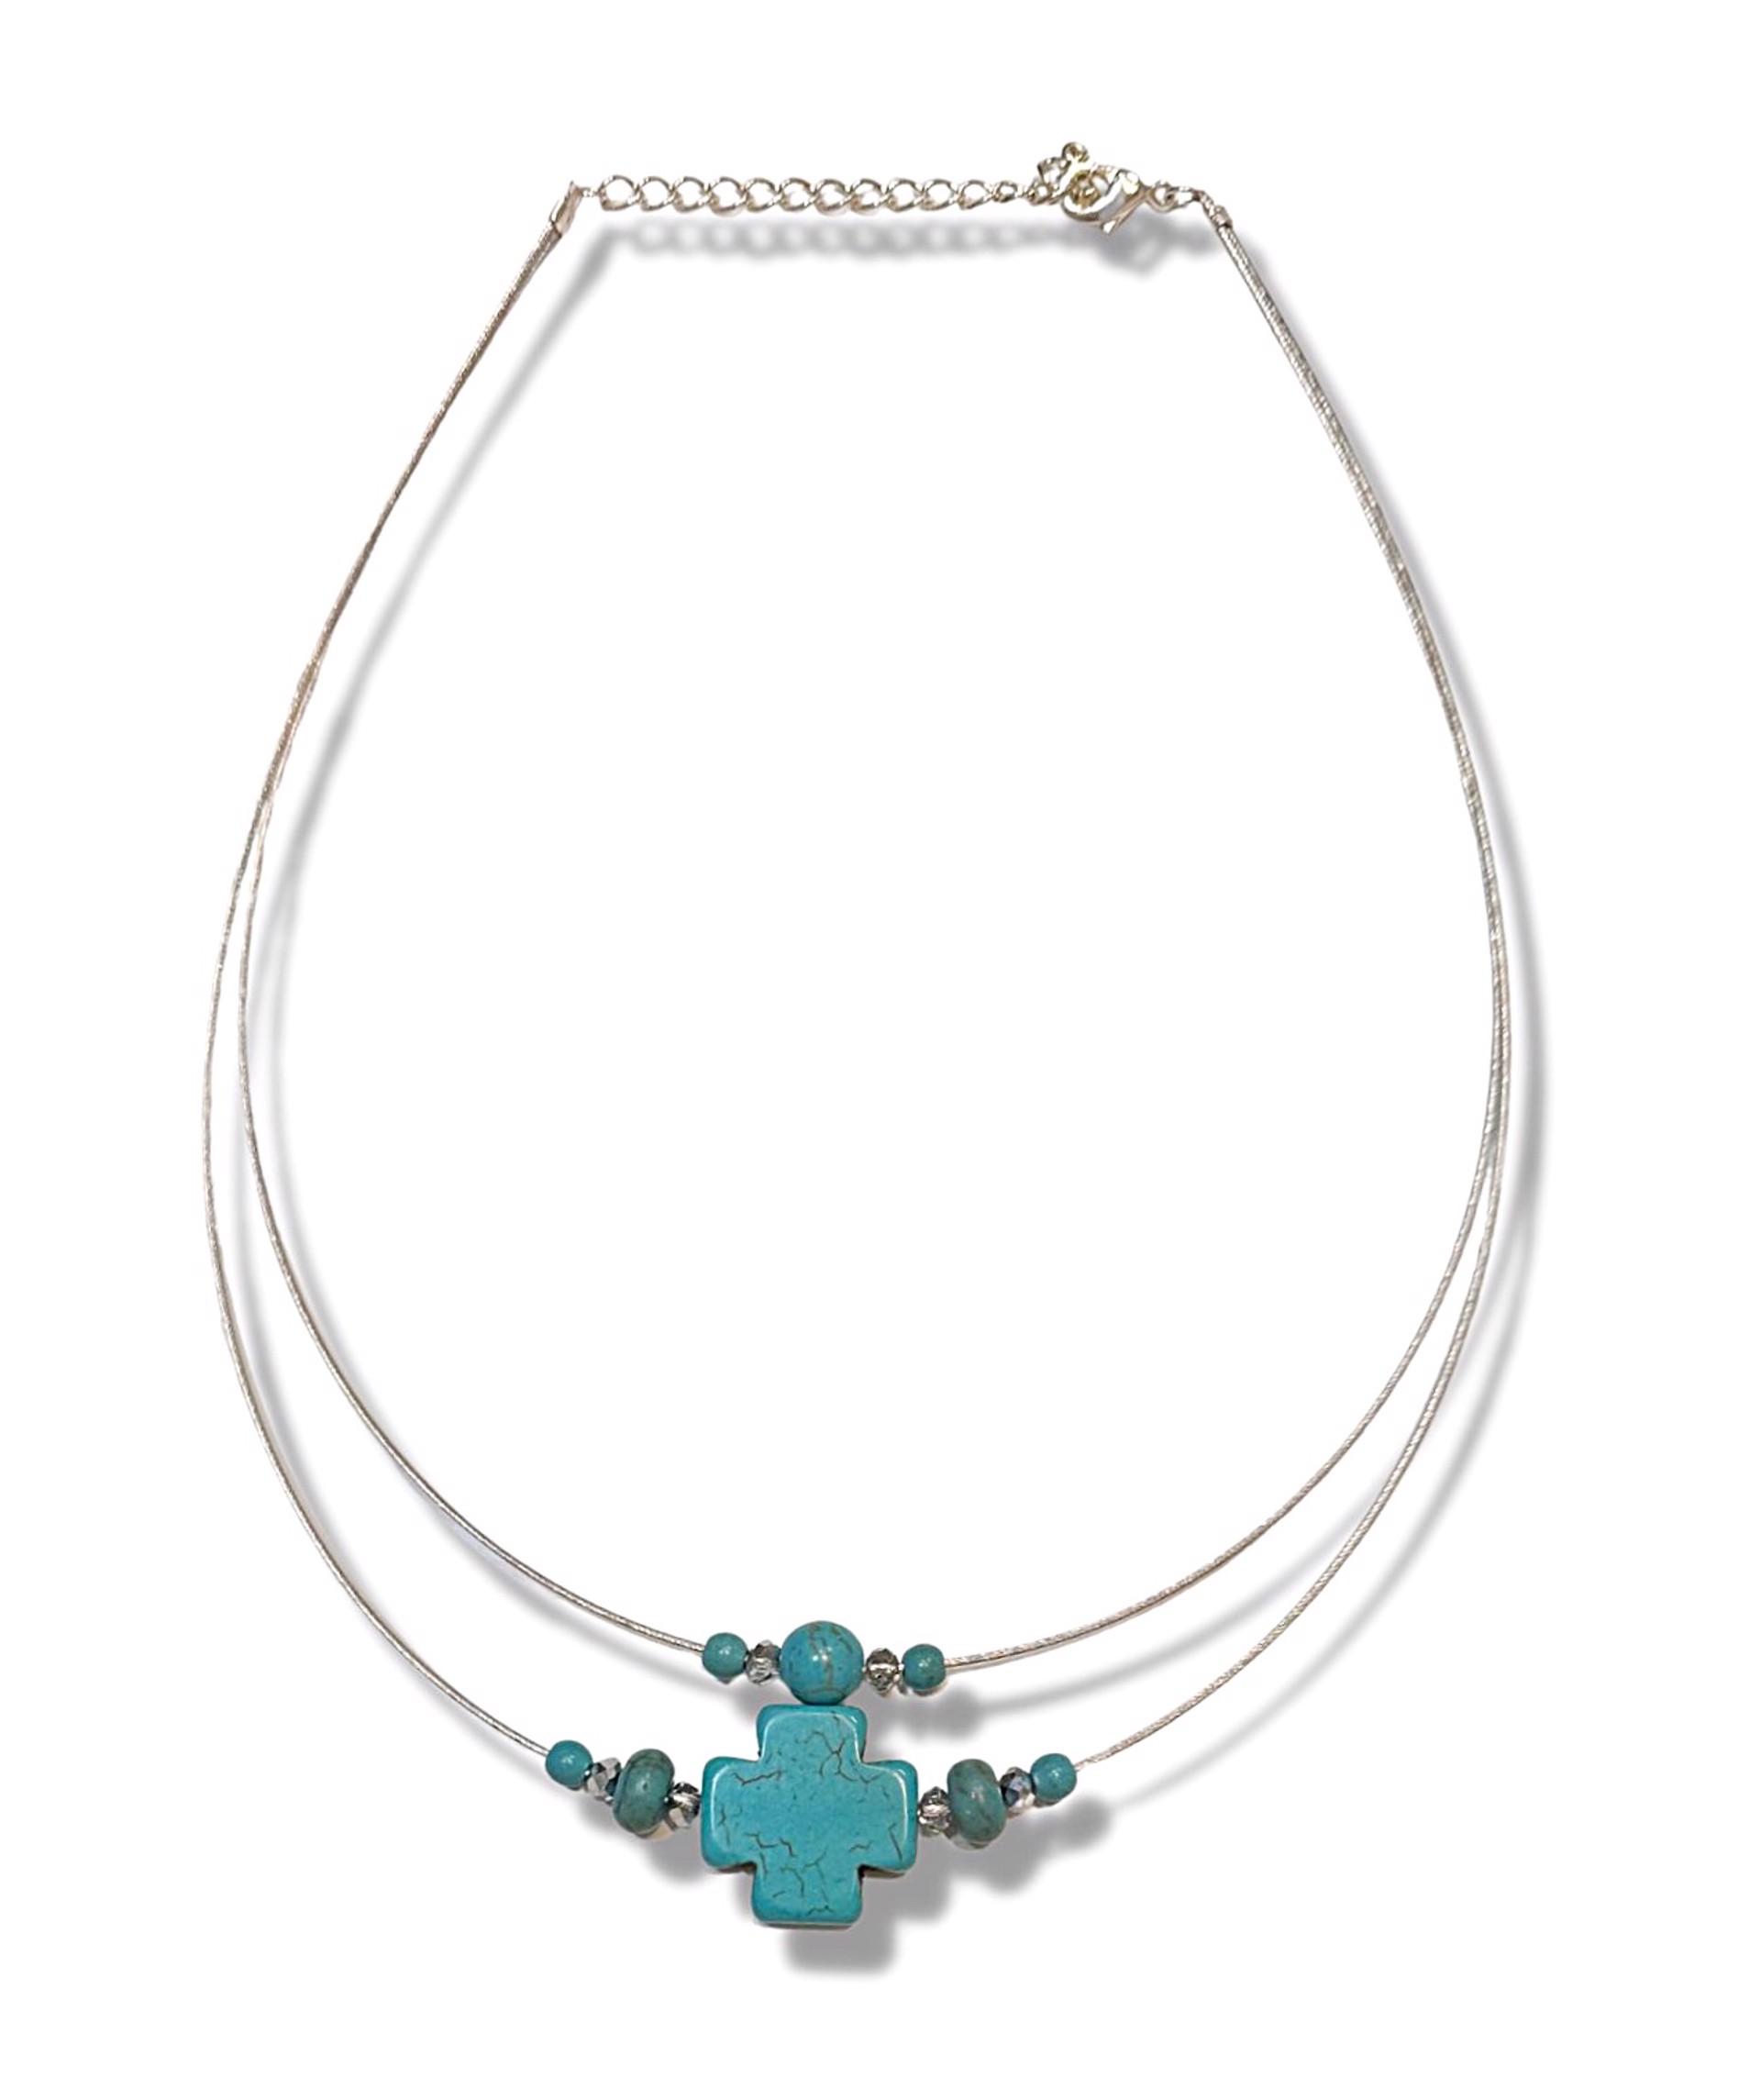 Necklace - Turquoise Crosses with Beads on a Silver Wire by Kai Cook